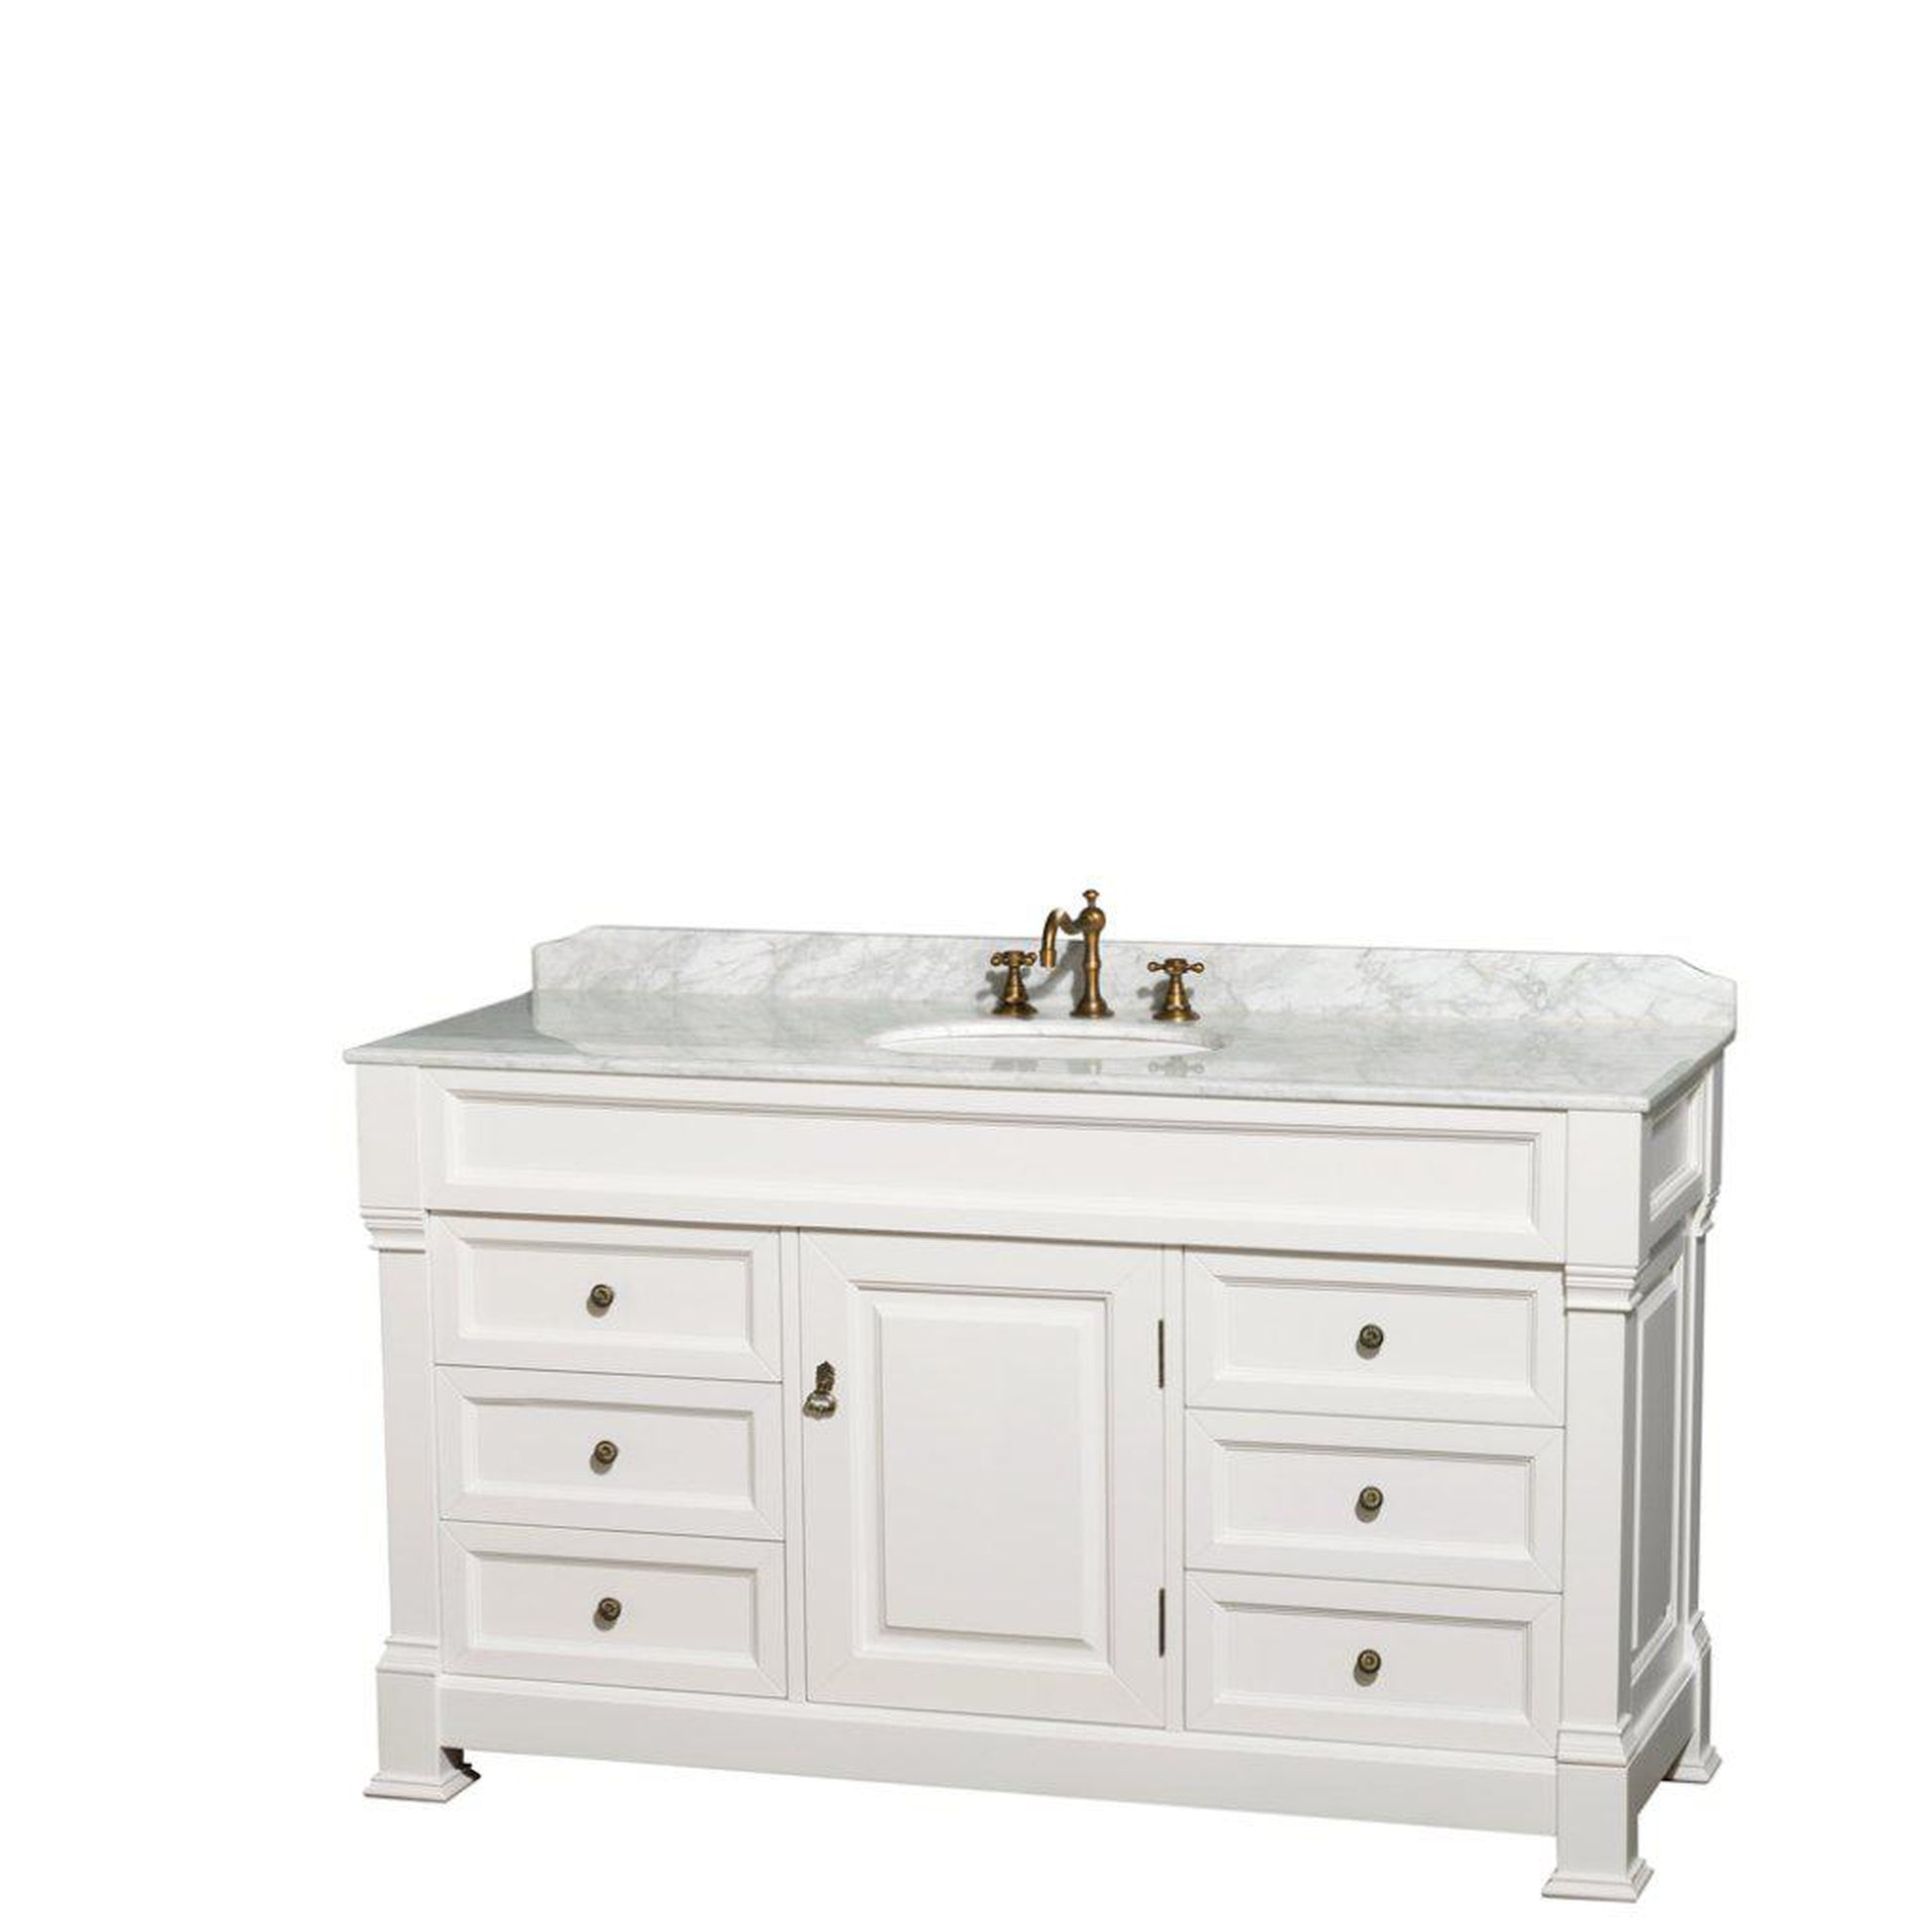 Wyndham Collection Andover 60" Single Bathroom White Vanity With White Carrara Marble Countertop And Undermount Oval Sink, And No Mirror